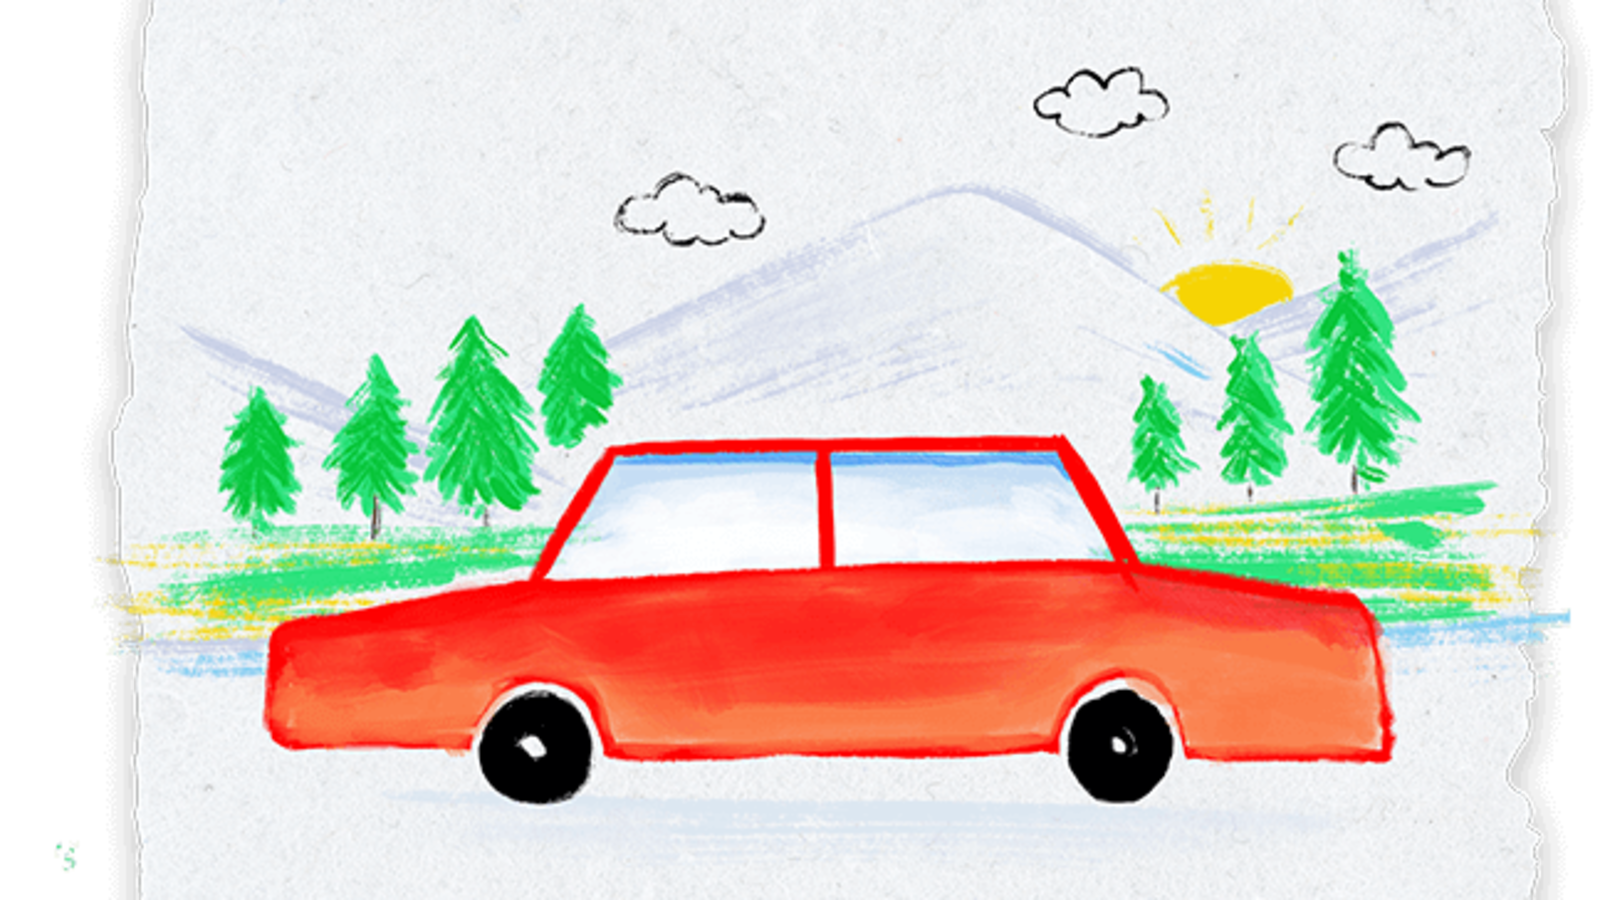 Share 180+ car drawing for kids